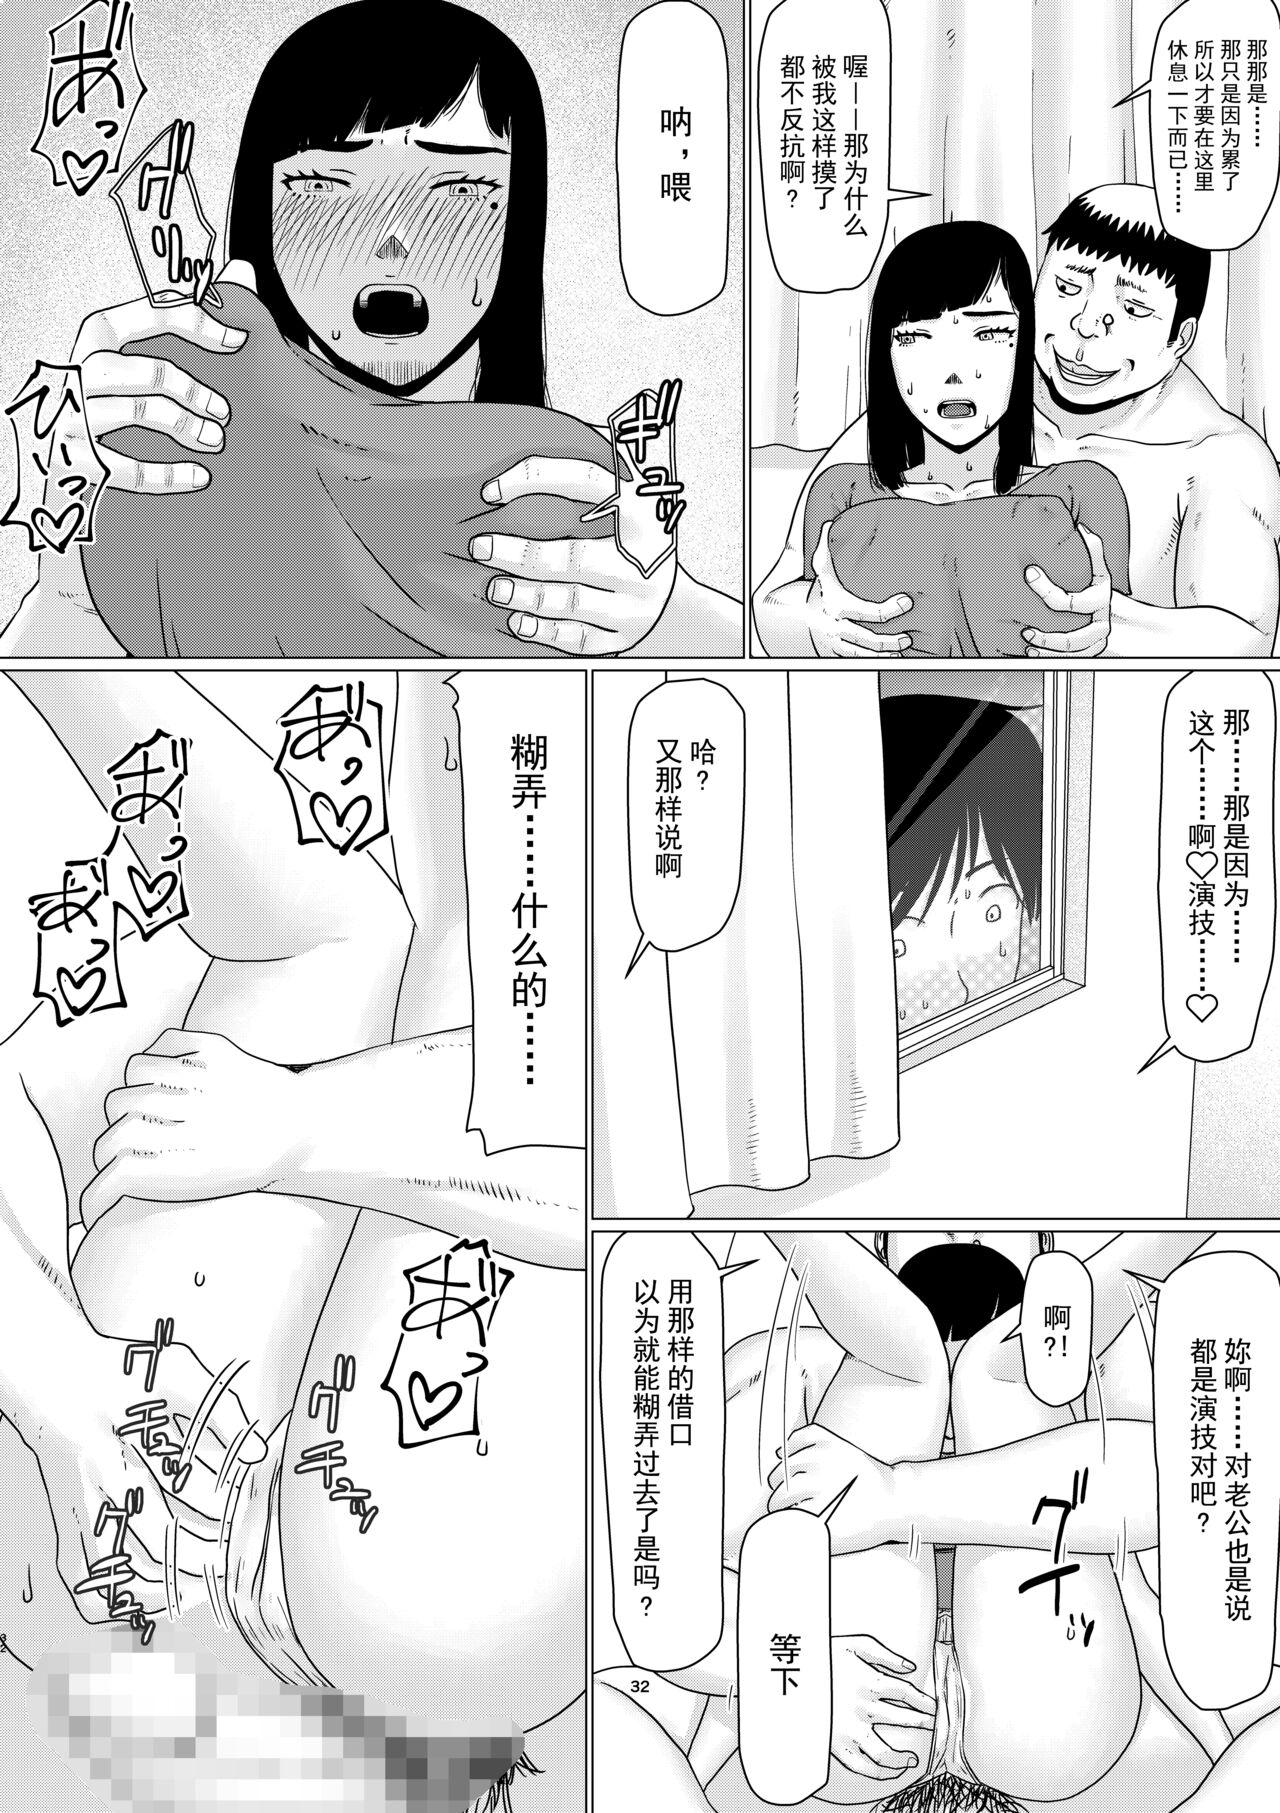 (Dōjinshi) Chieri can't lose!3 -Perverted toilet wife who fertilizes anyone's sperm with her husband's approval- Volume 1 (Original) [Chinese][超勇漢化組] 32